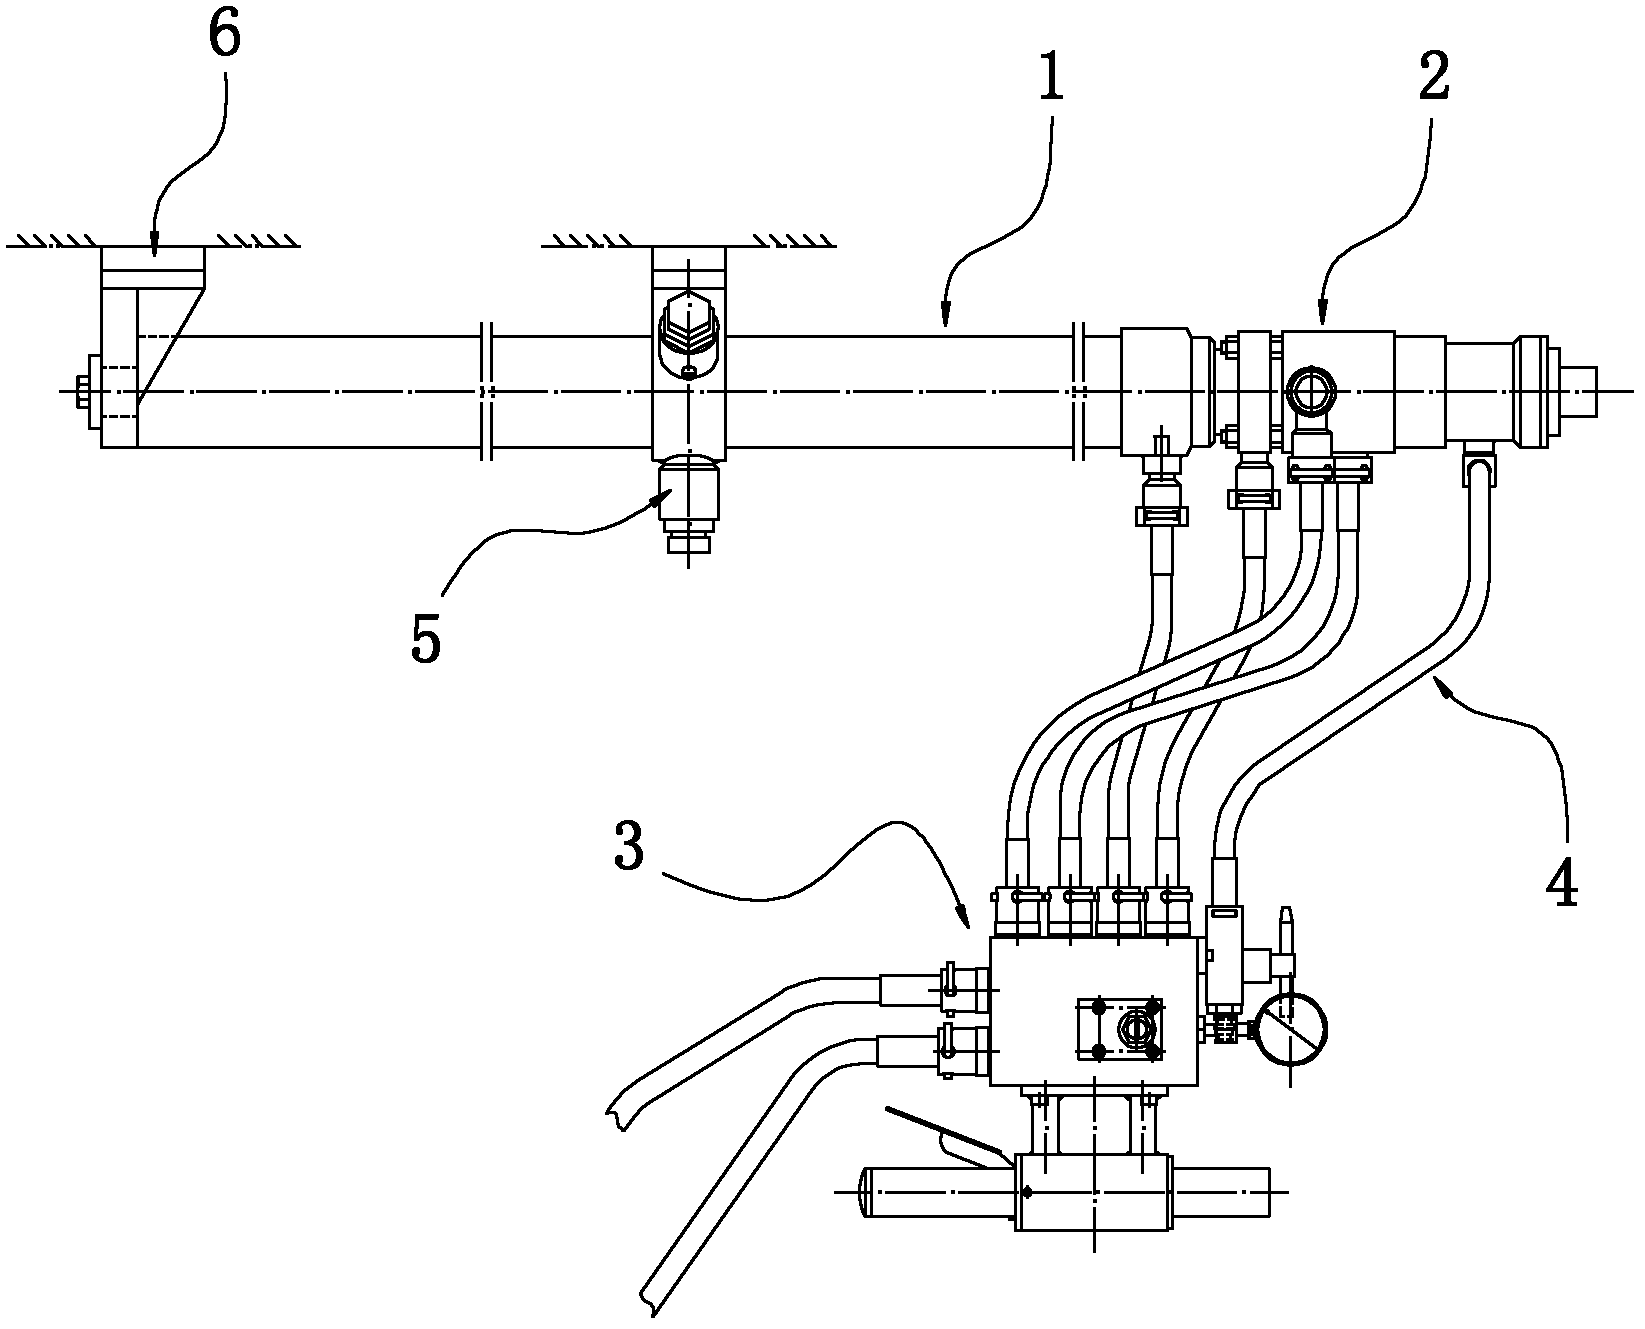 Internal-transmission torque hydraulic cylinder and water-detecting gas-detecting onboard jumbolter